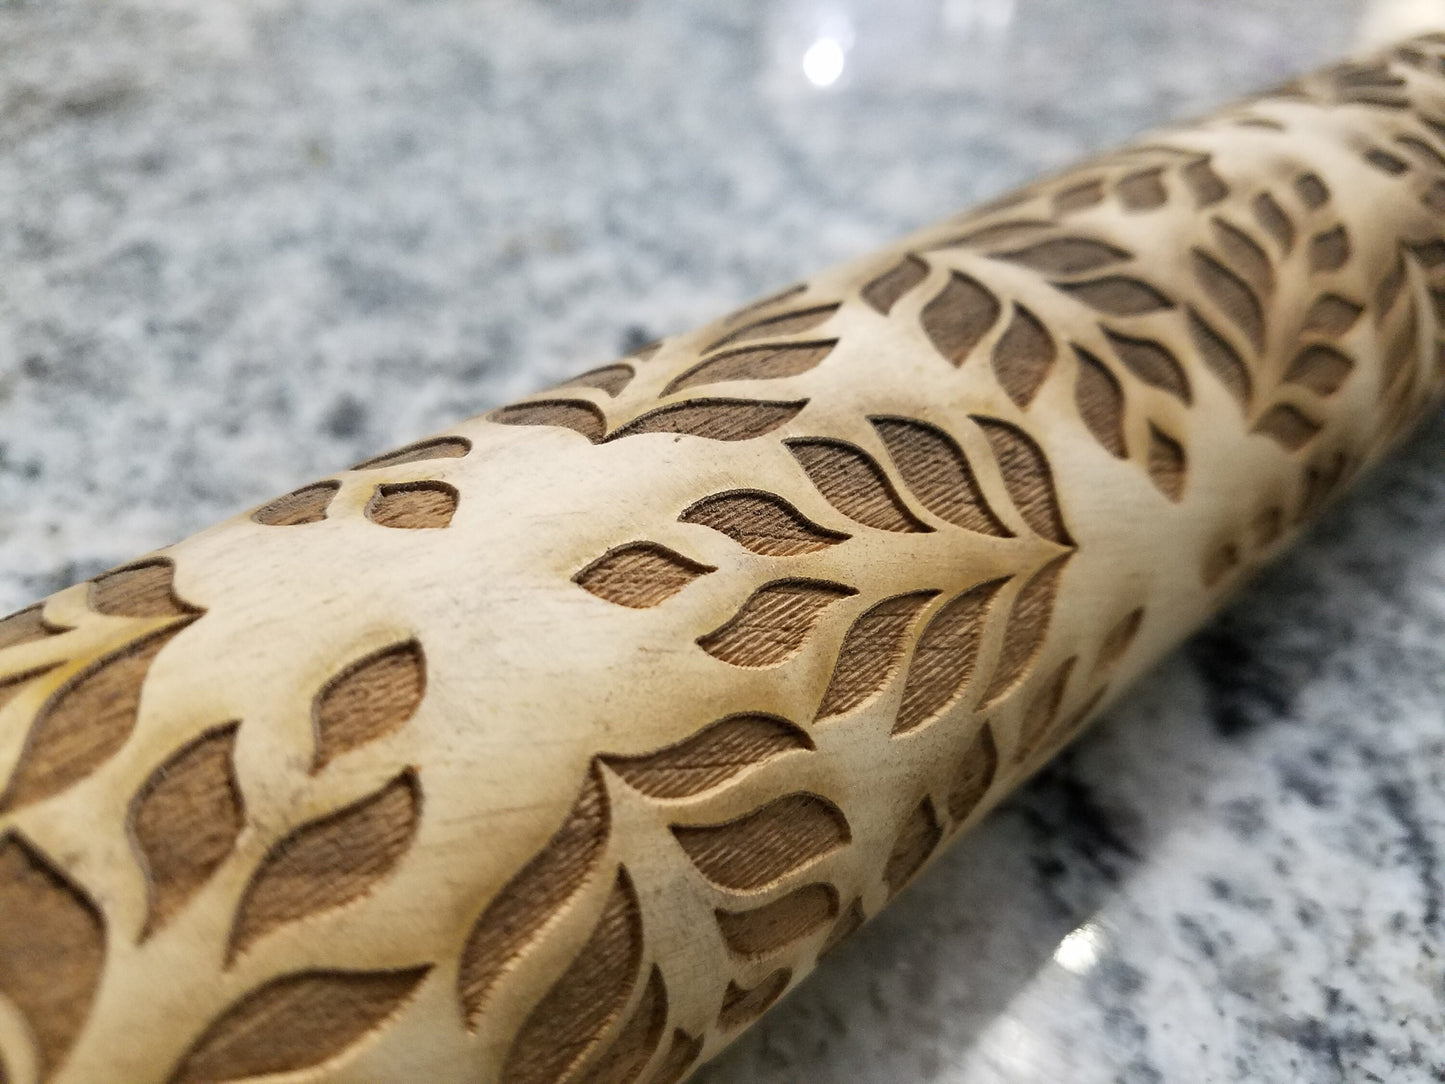 Leaf, Leaves, Floral Pattern, Geometric, 10 Inch Rolling Pin, Pie Crust, Texture, Embossed, Engraved, Wood, Cookie Stamp, Wooden, pottery